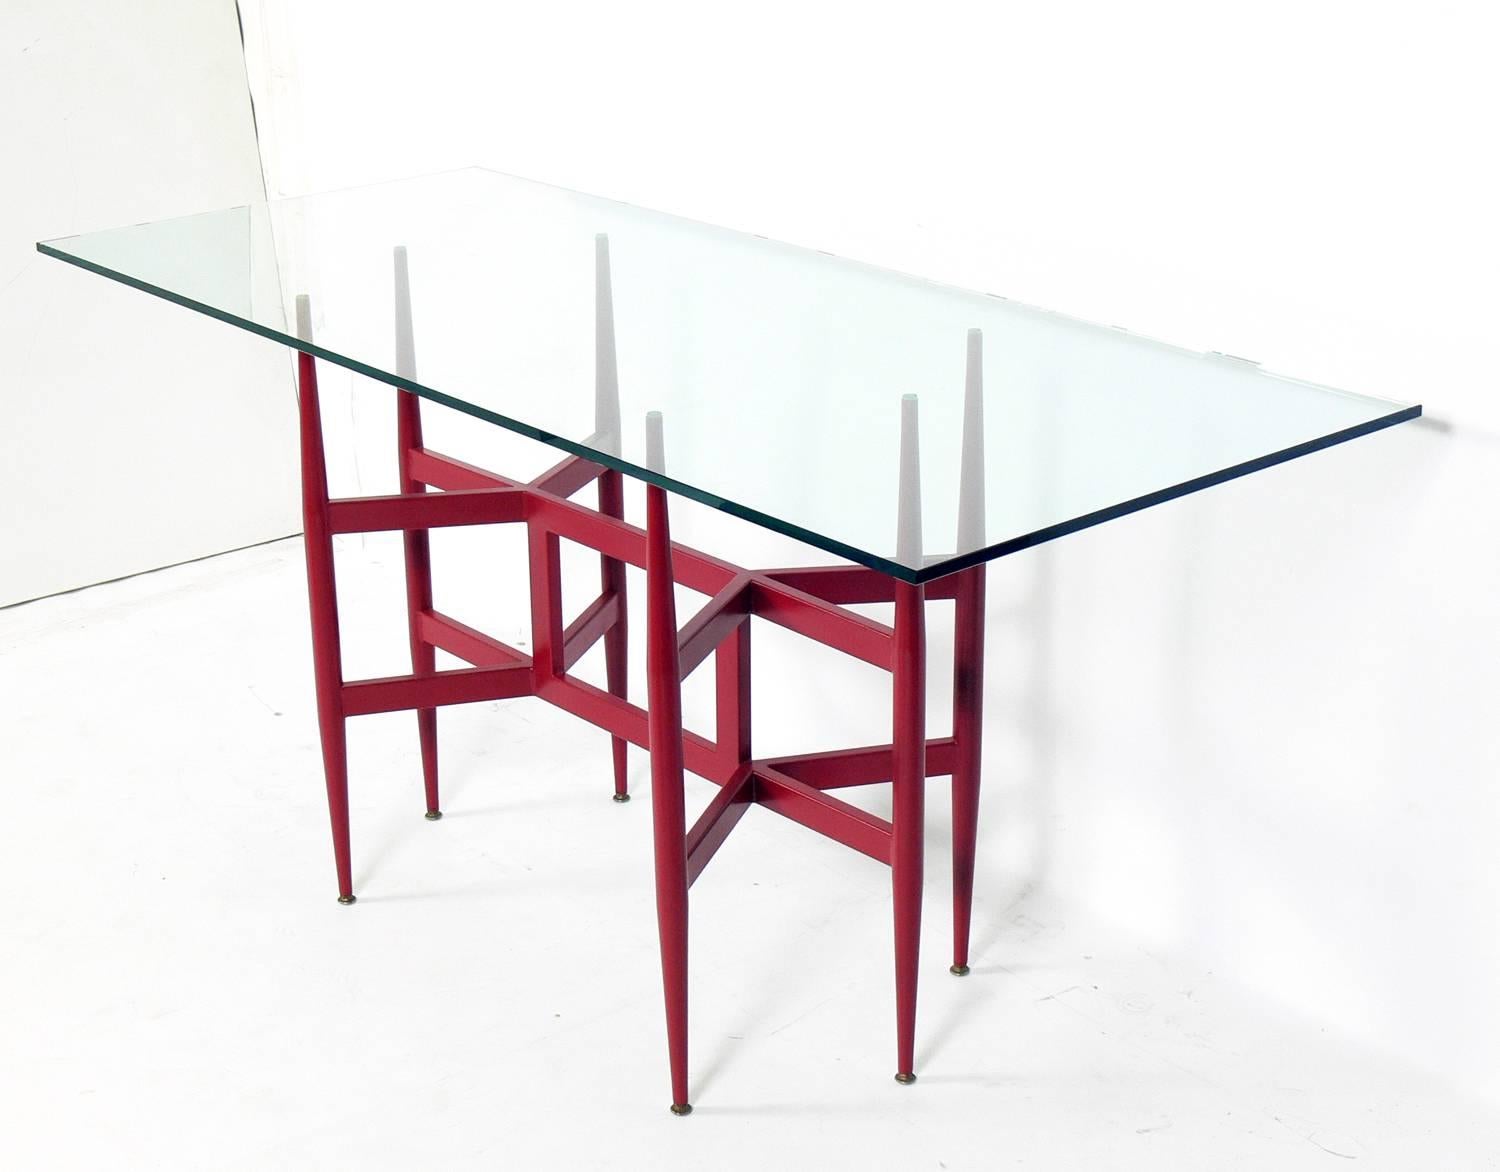 Sculptural Italian Mid-Century console table, Italy, circa 1950s. It has been repainted at some point in a deep red color. It is a versatile size and can be used as a console table, desk, or bar.